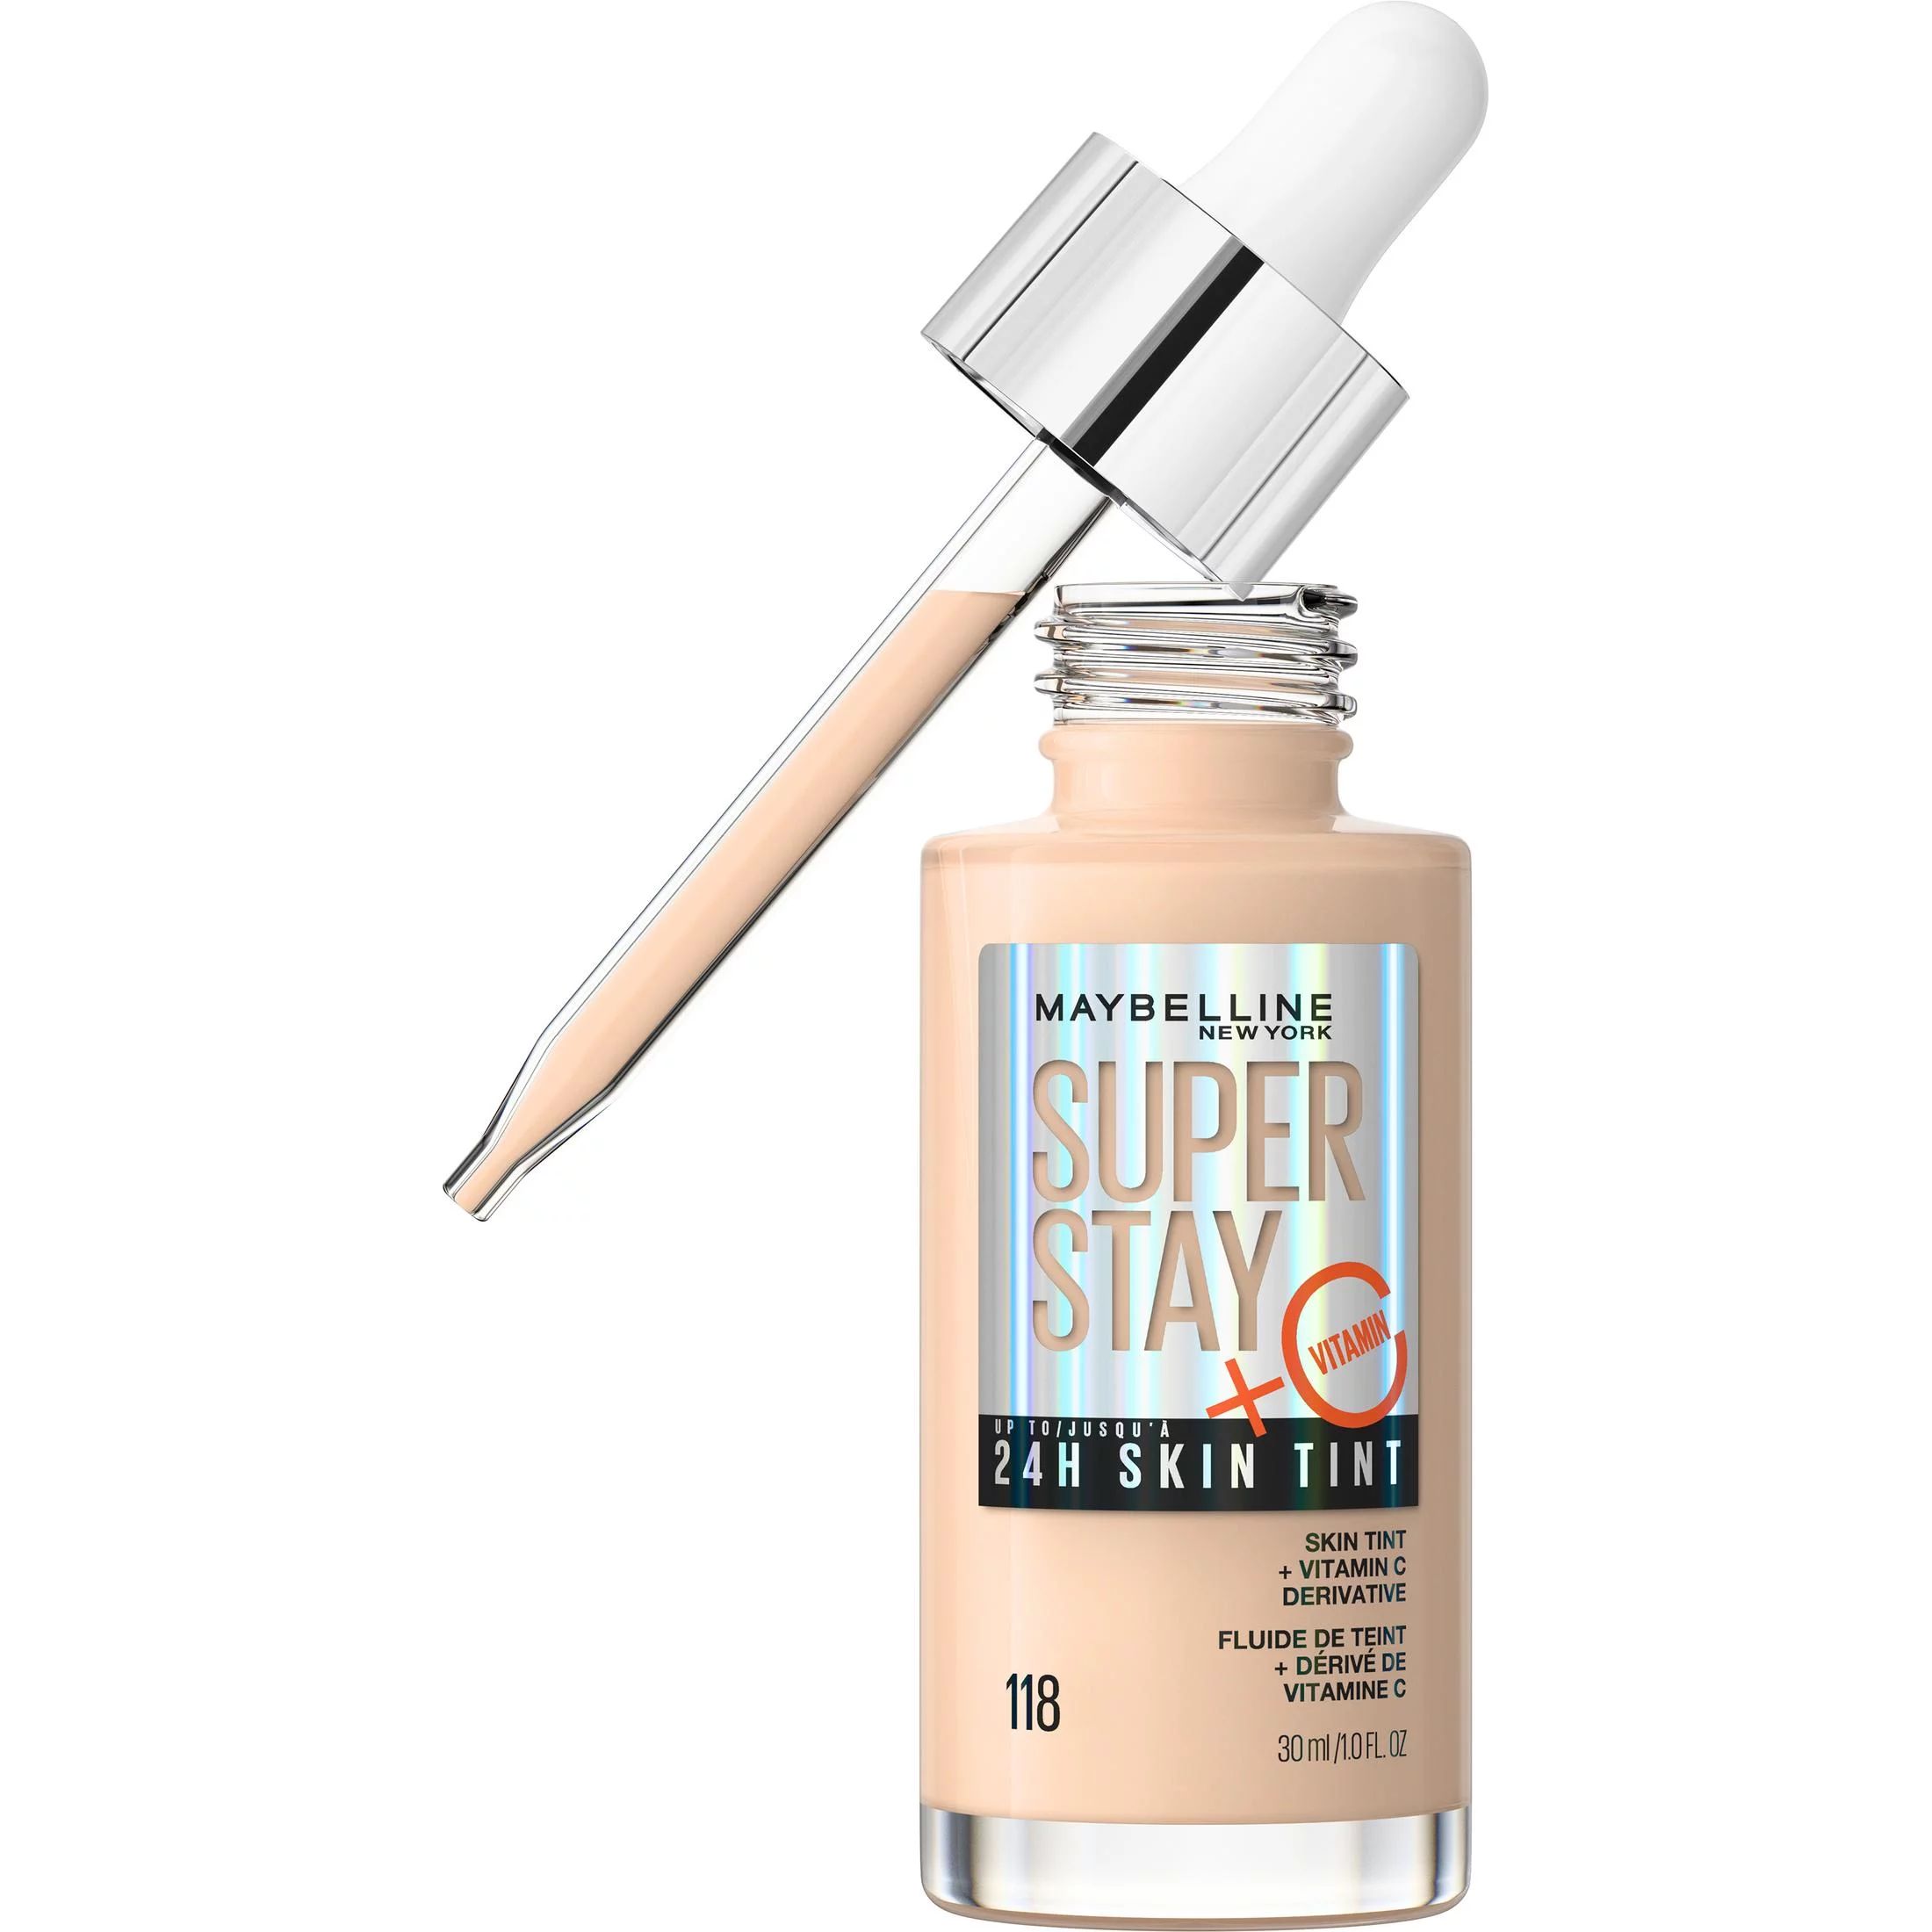 Maybelline Super Stay Super Stay Up to 24HR Skin Tint with Vitamin C, 118, 1 fl oz | Walmart (US)